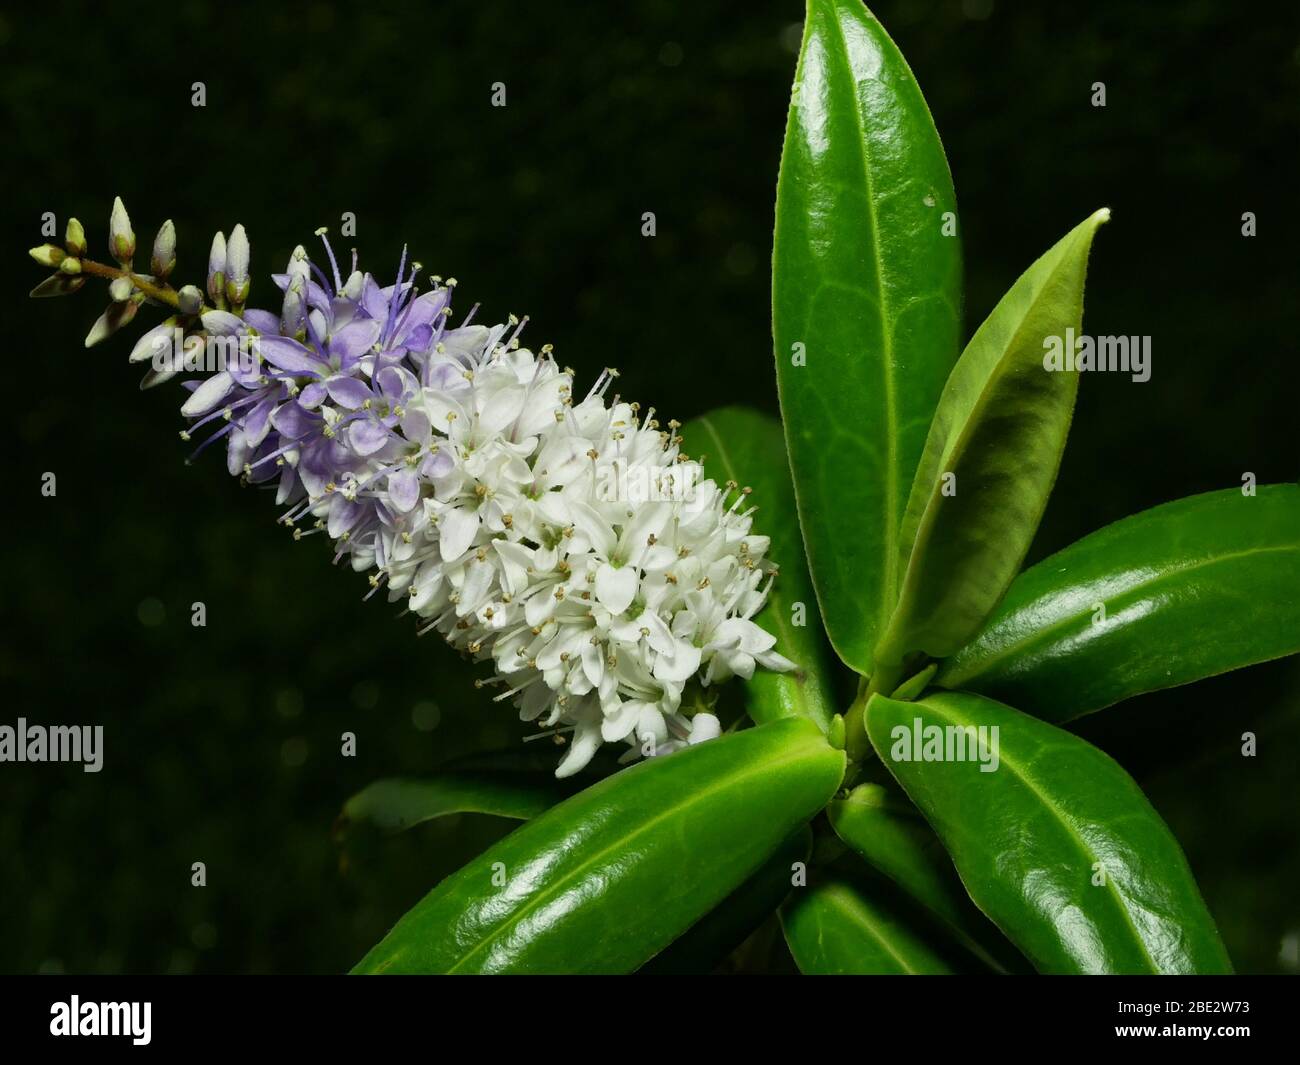 Hebe Great Orme close up of plant showing flowers and glossy leaves isolated against a black background Stock Photo